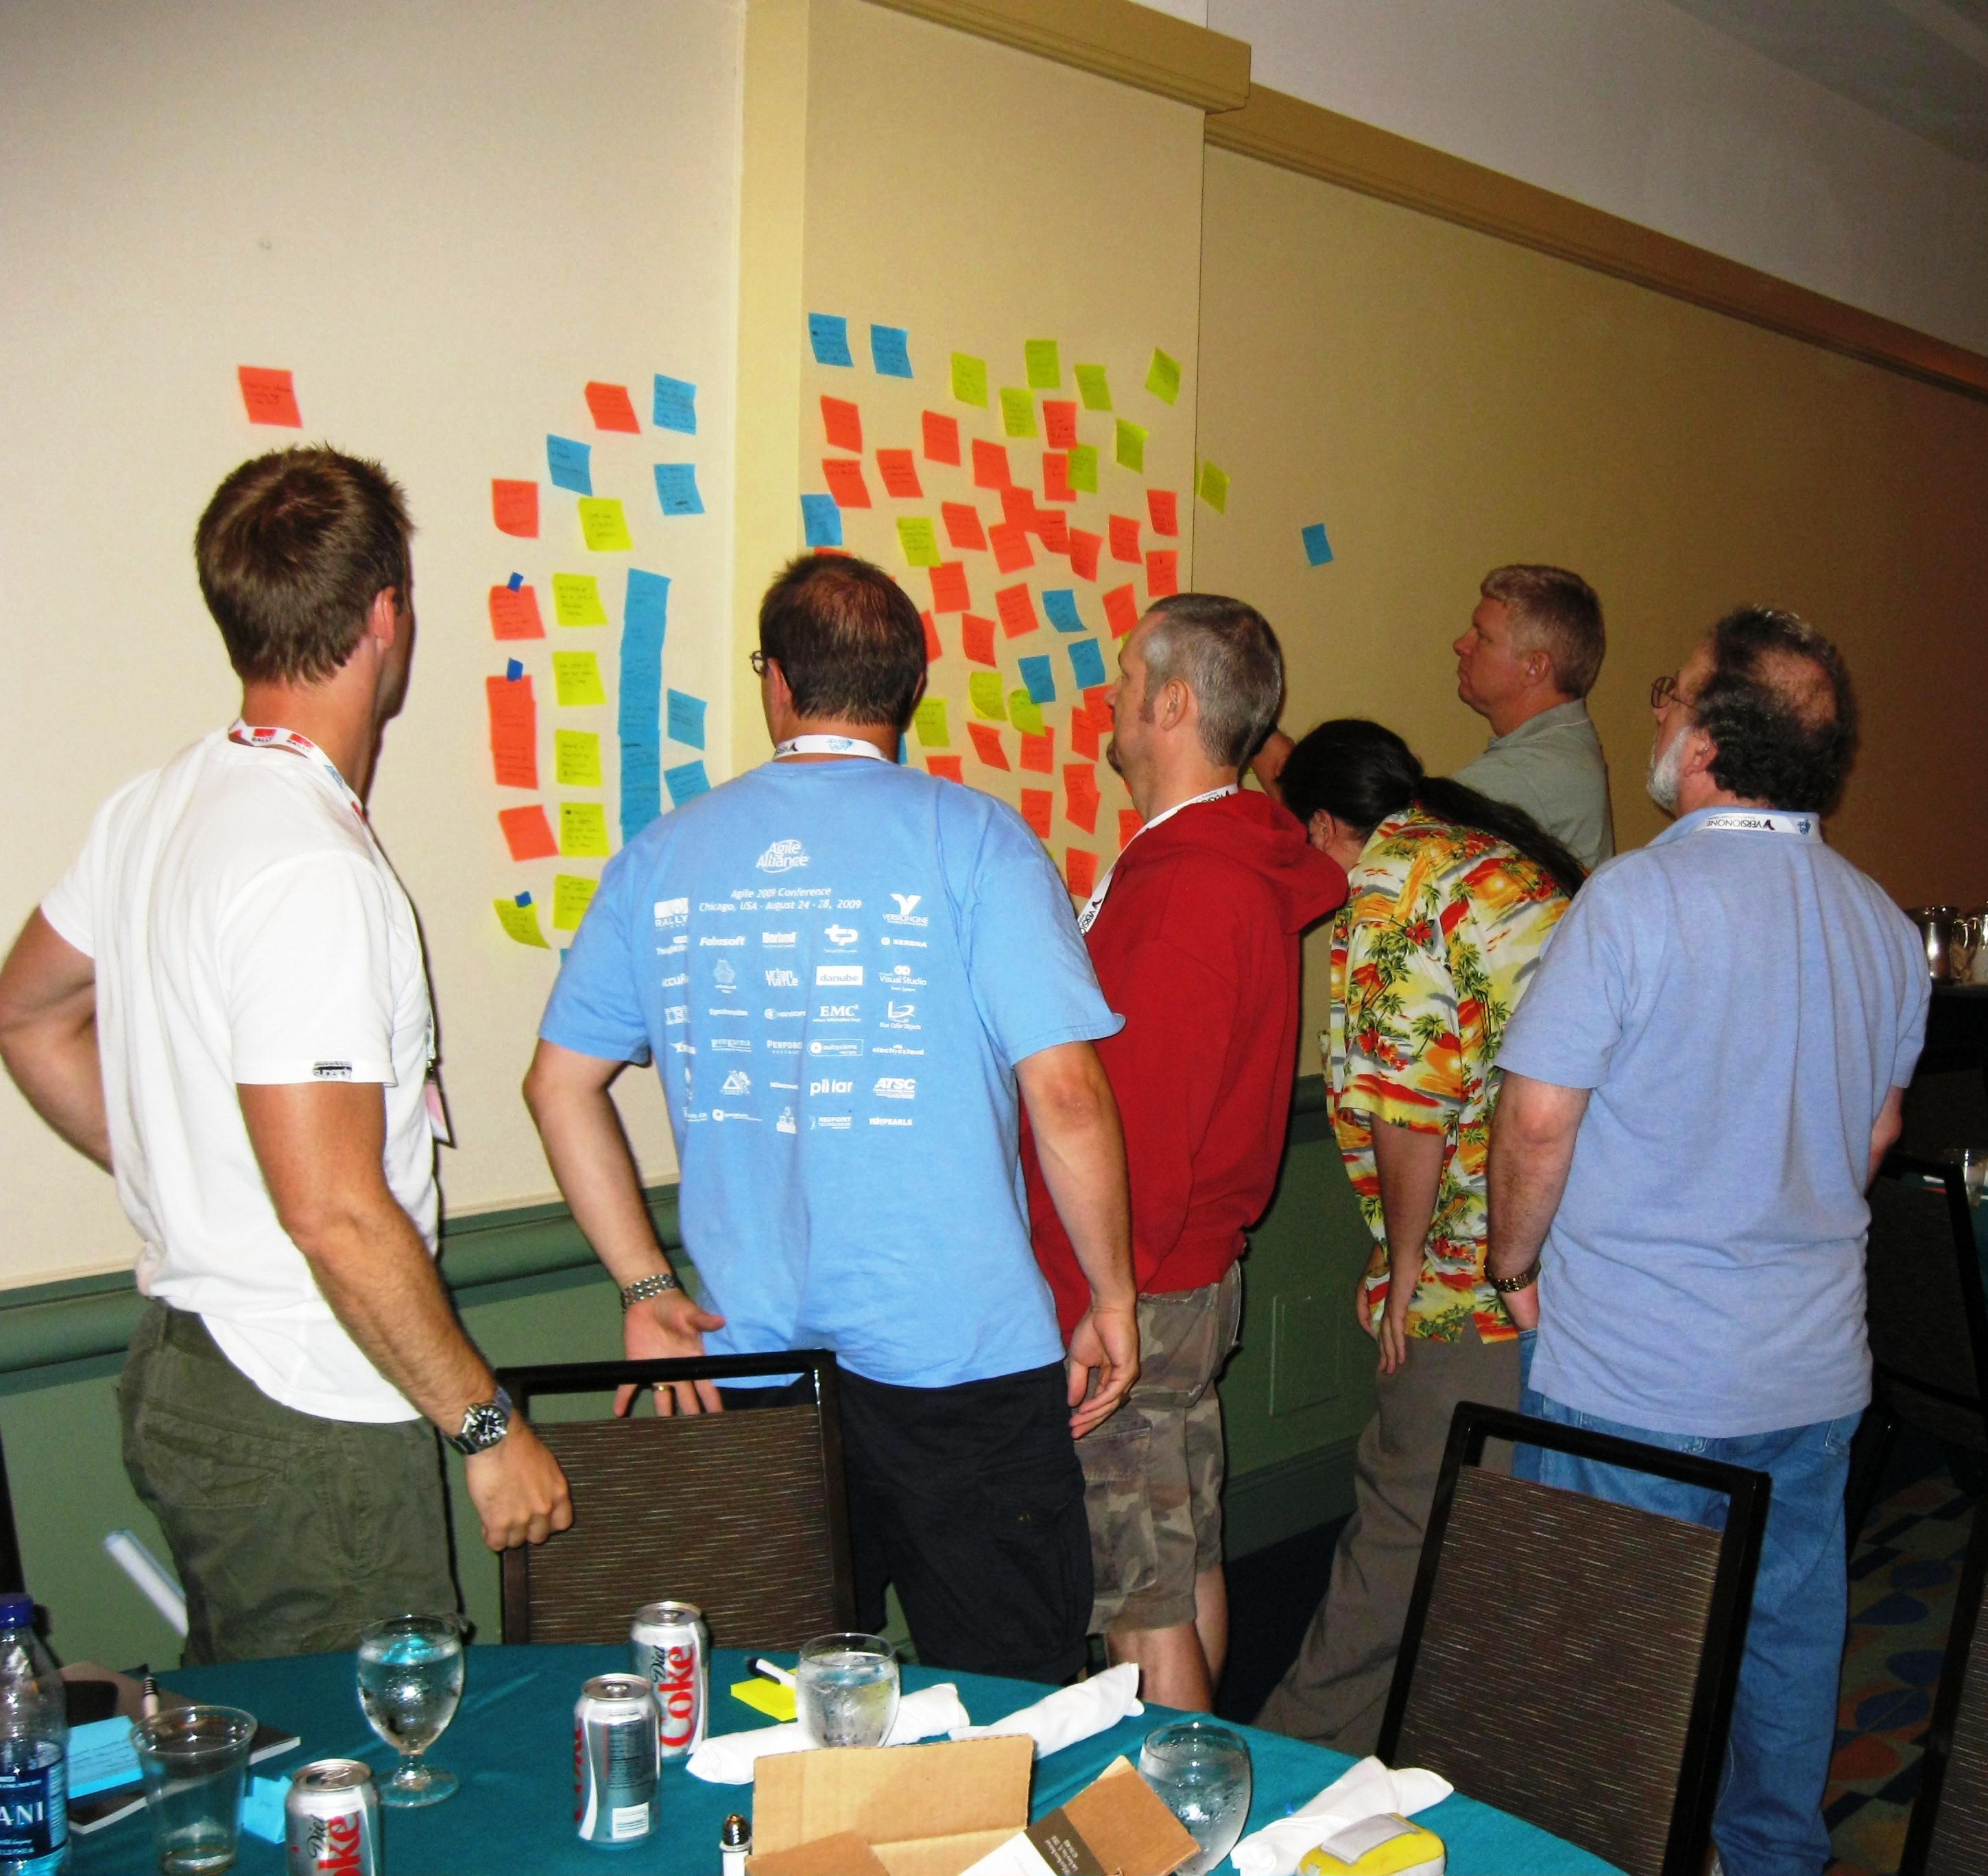 A team reviews and priorities the issues uncovered during a retrospective.